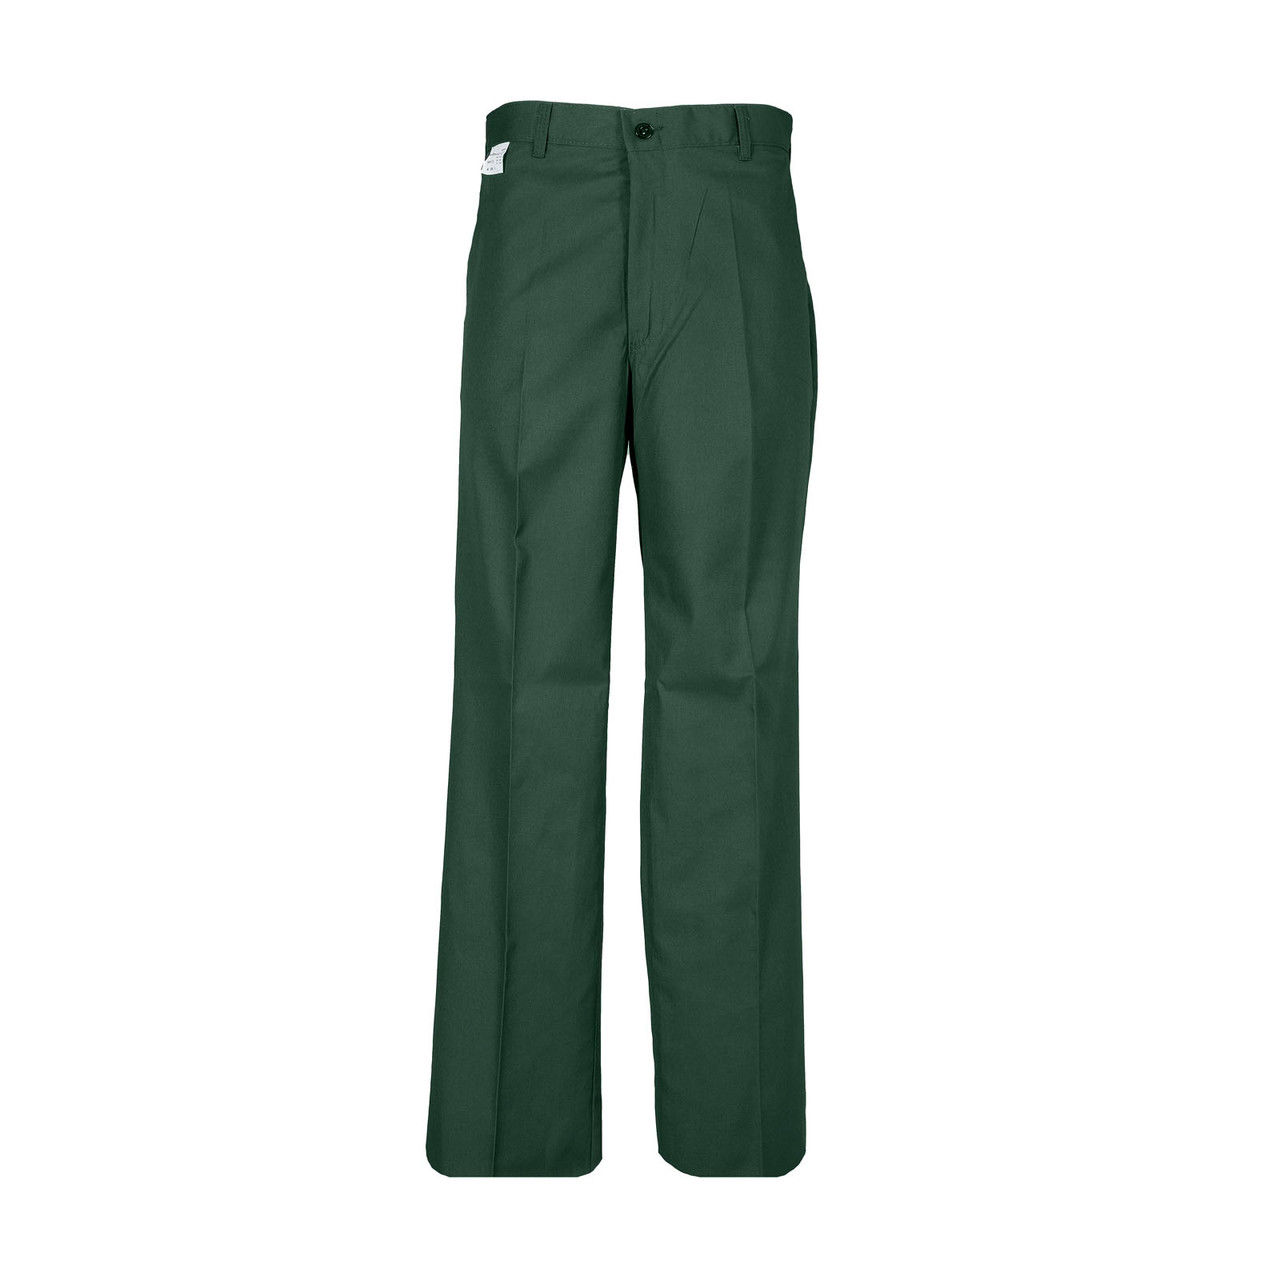 What do these green work pants endure?